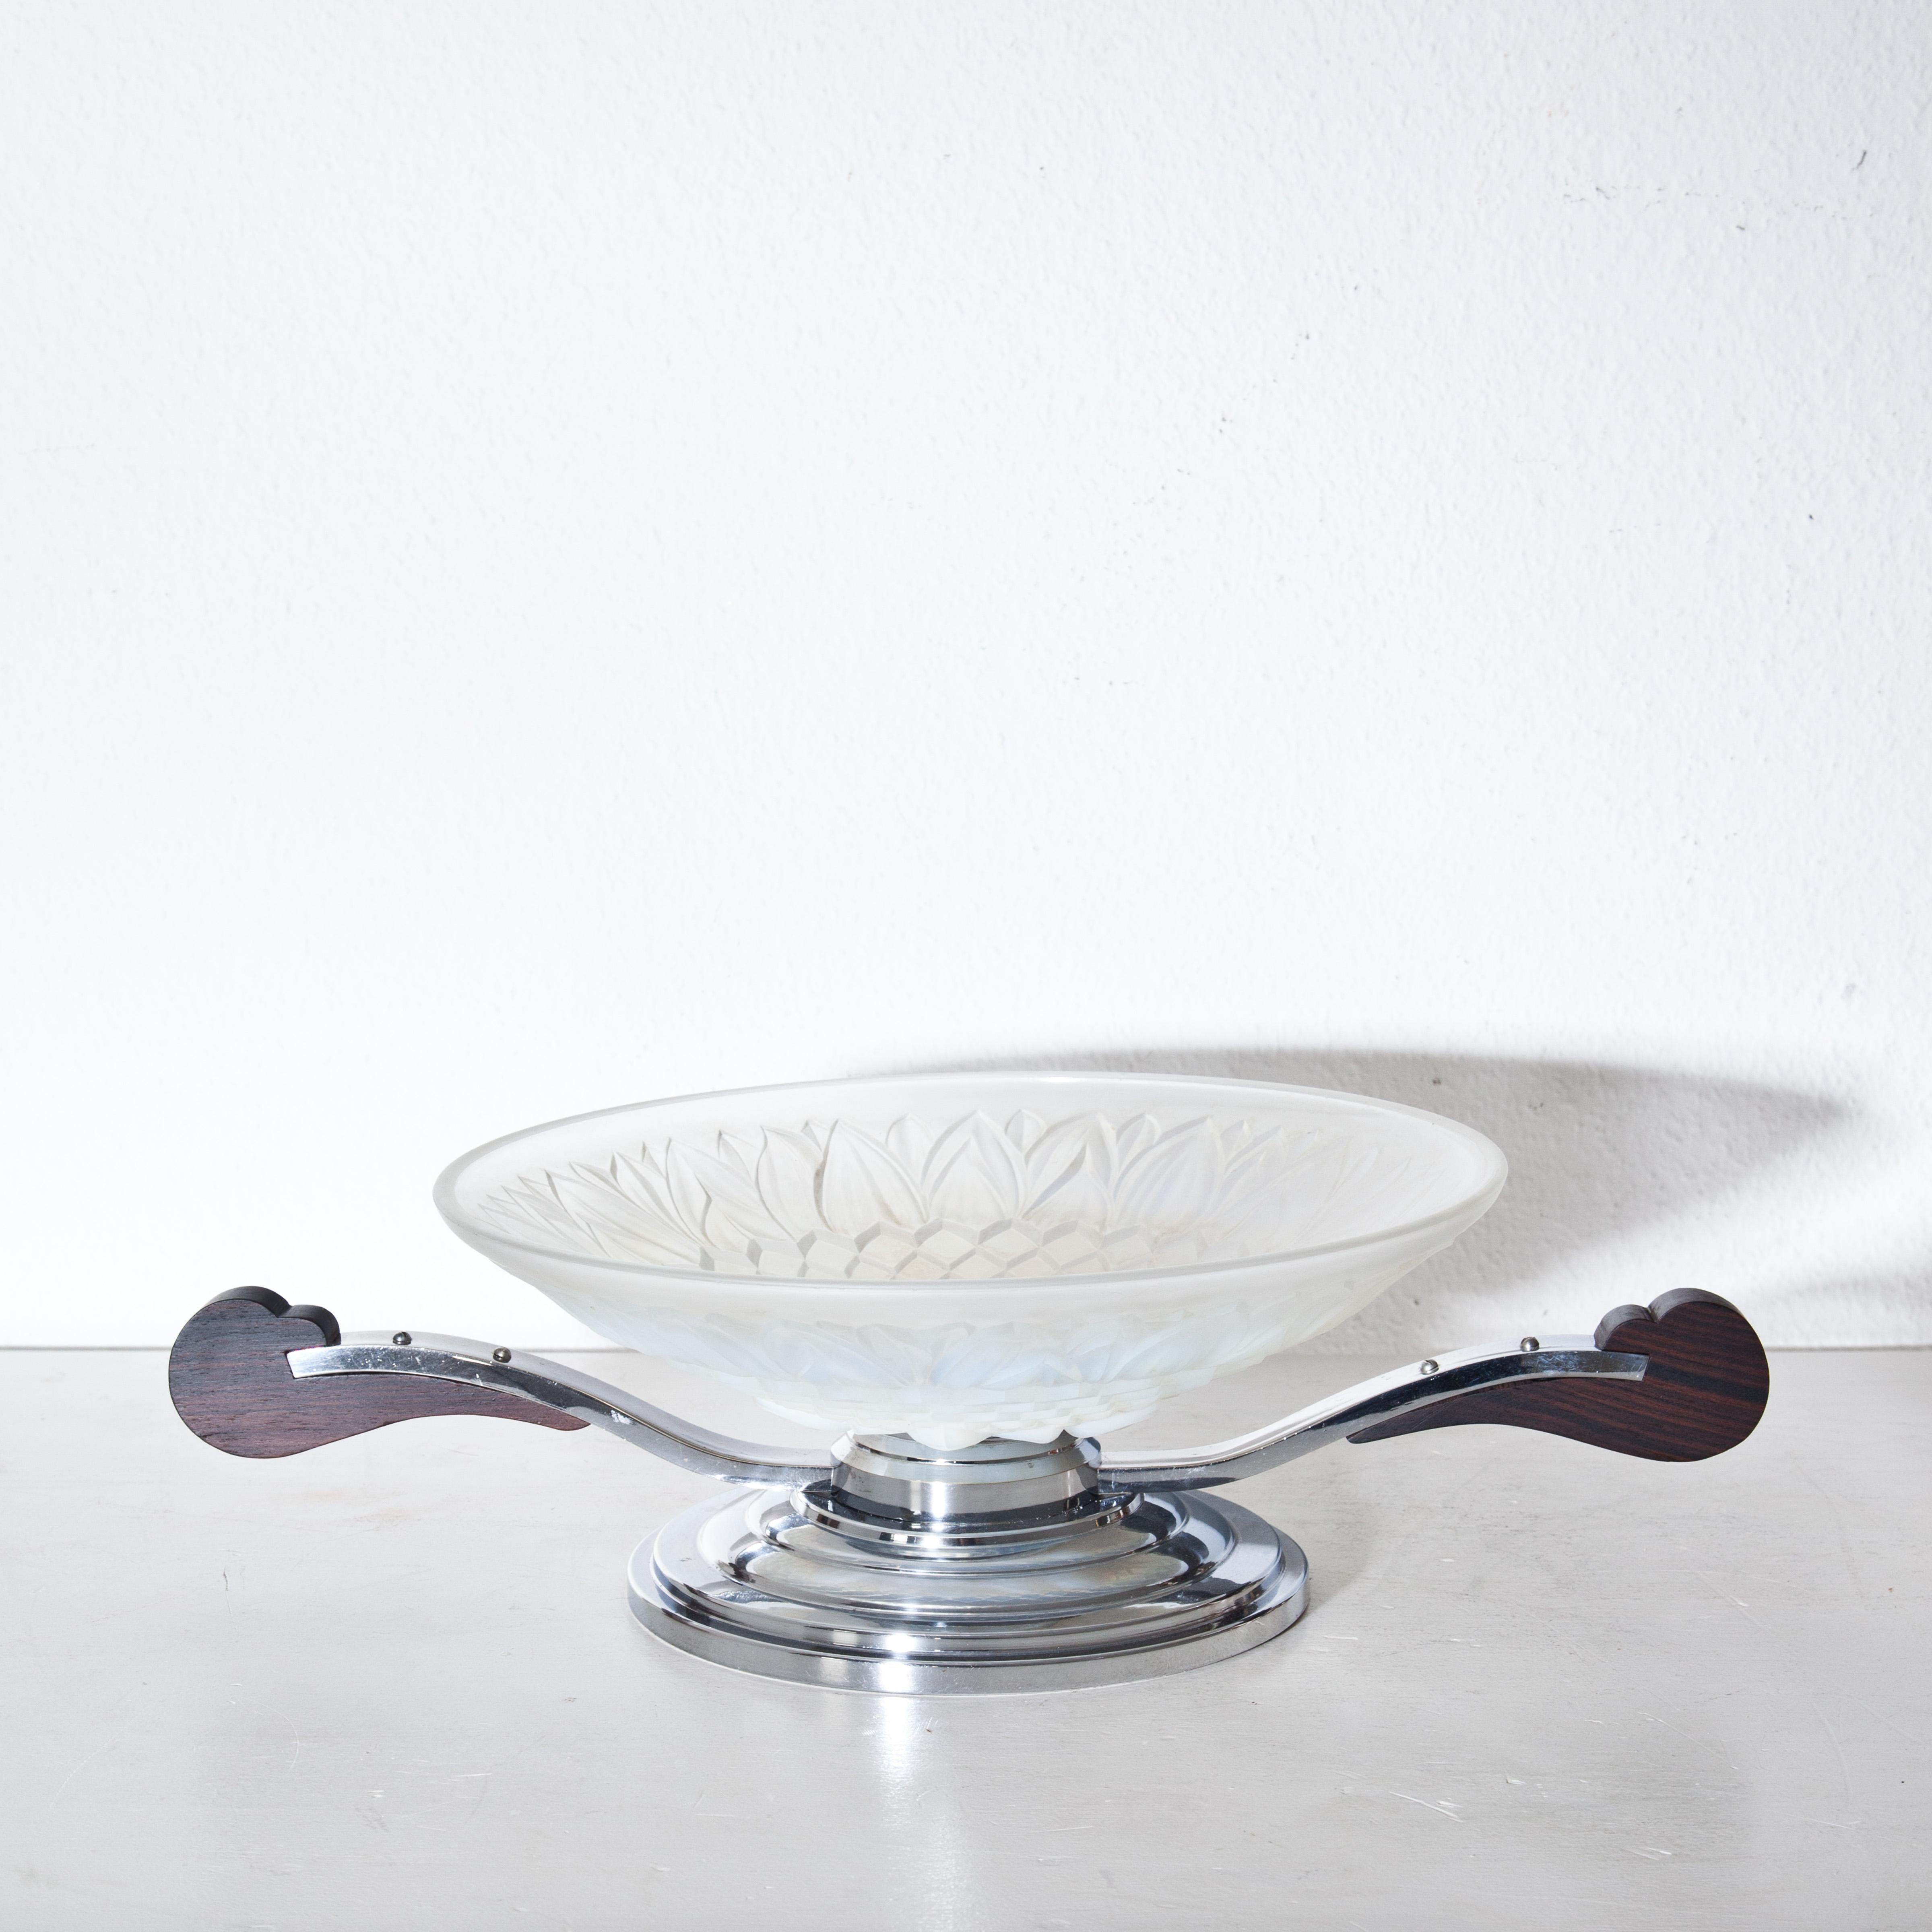 Art Deco bowl standing on a round base with glass insert and wooden handles. The wall is decorated with leaf decorations in relief.